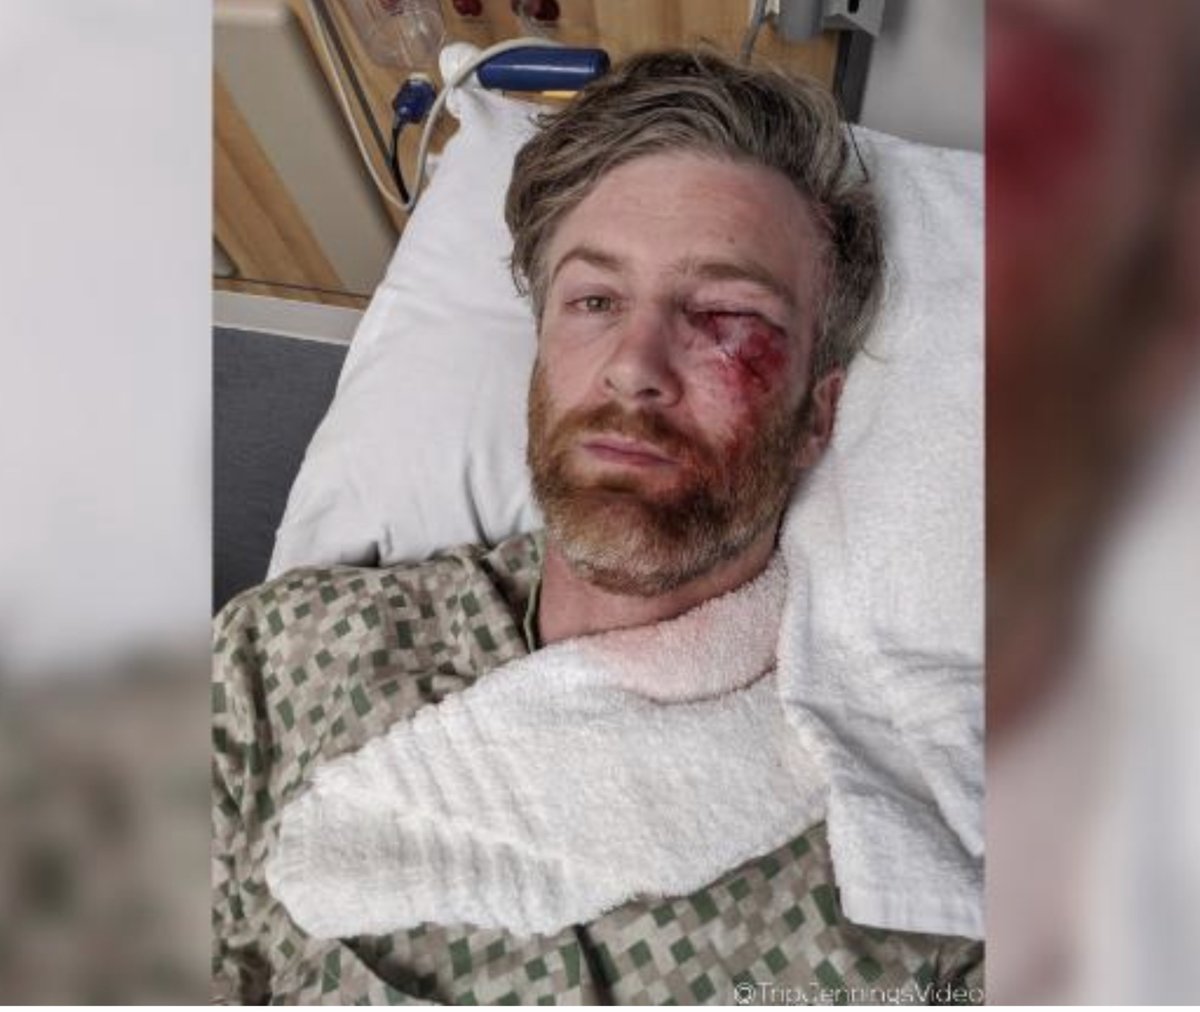 the fact that  @realDonaldTrump  @TheJusticeDept  @DHSgov  @CBP  @DHS_Wolf &  @HomelandKen <—both unlawfully in their  @DHSOIG positions? FVRA?this is NOT OKAY“I got hit right in the eye," Jennings told CNN, saying he suspects it was a pepper ball” https://www.cnn.com/2020/07/30/us/journalist-portland-protest-federal-agents-trnd/index.html?utm_medium=social&utm_content=2020-07-30T13%3A21%3A02&utm_source=twCNNi&utm_term=link